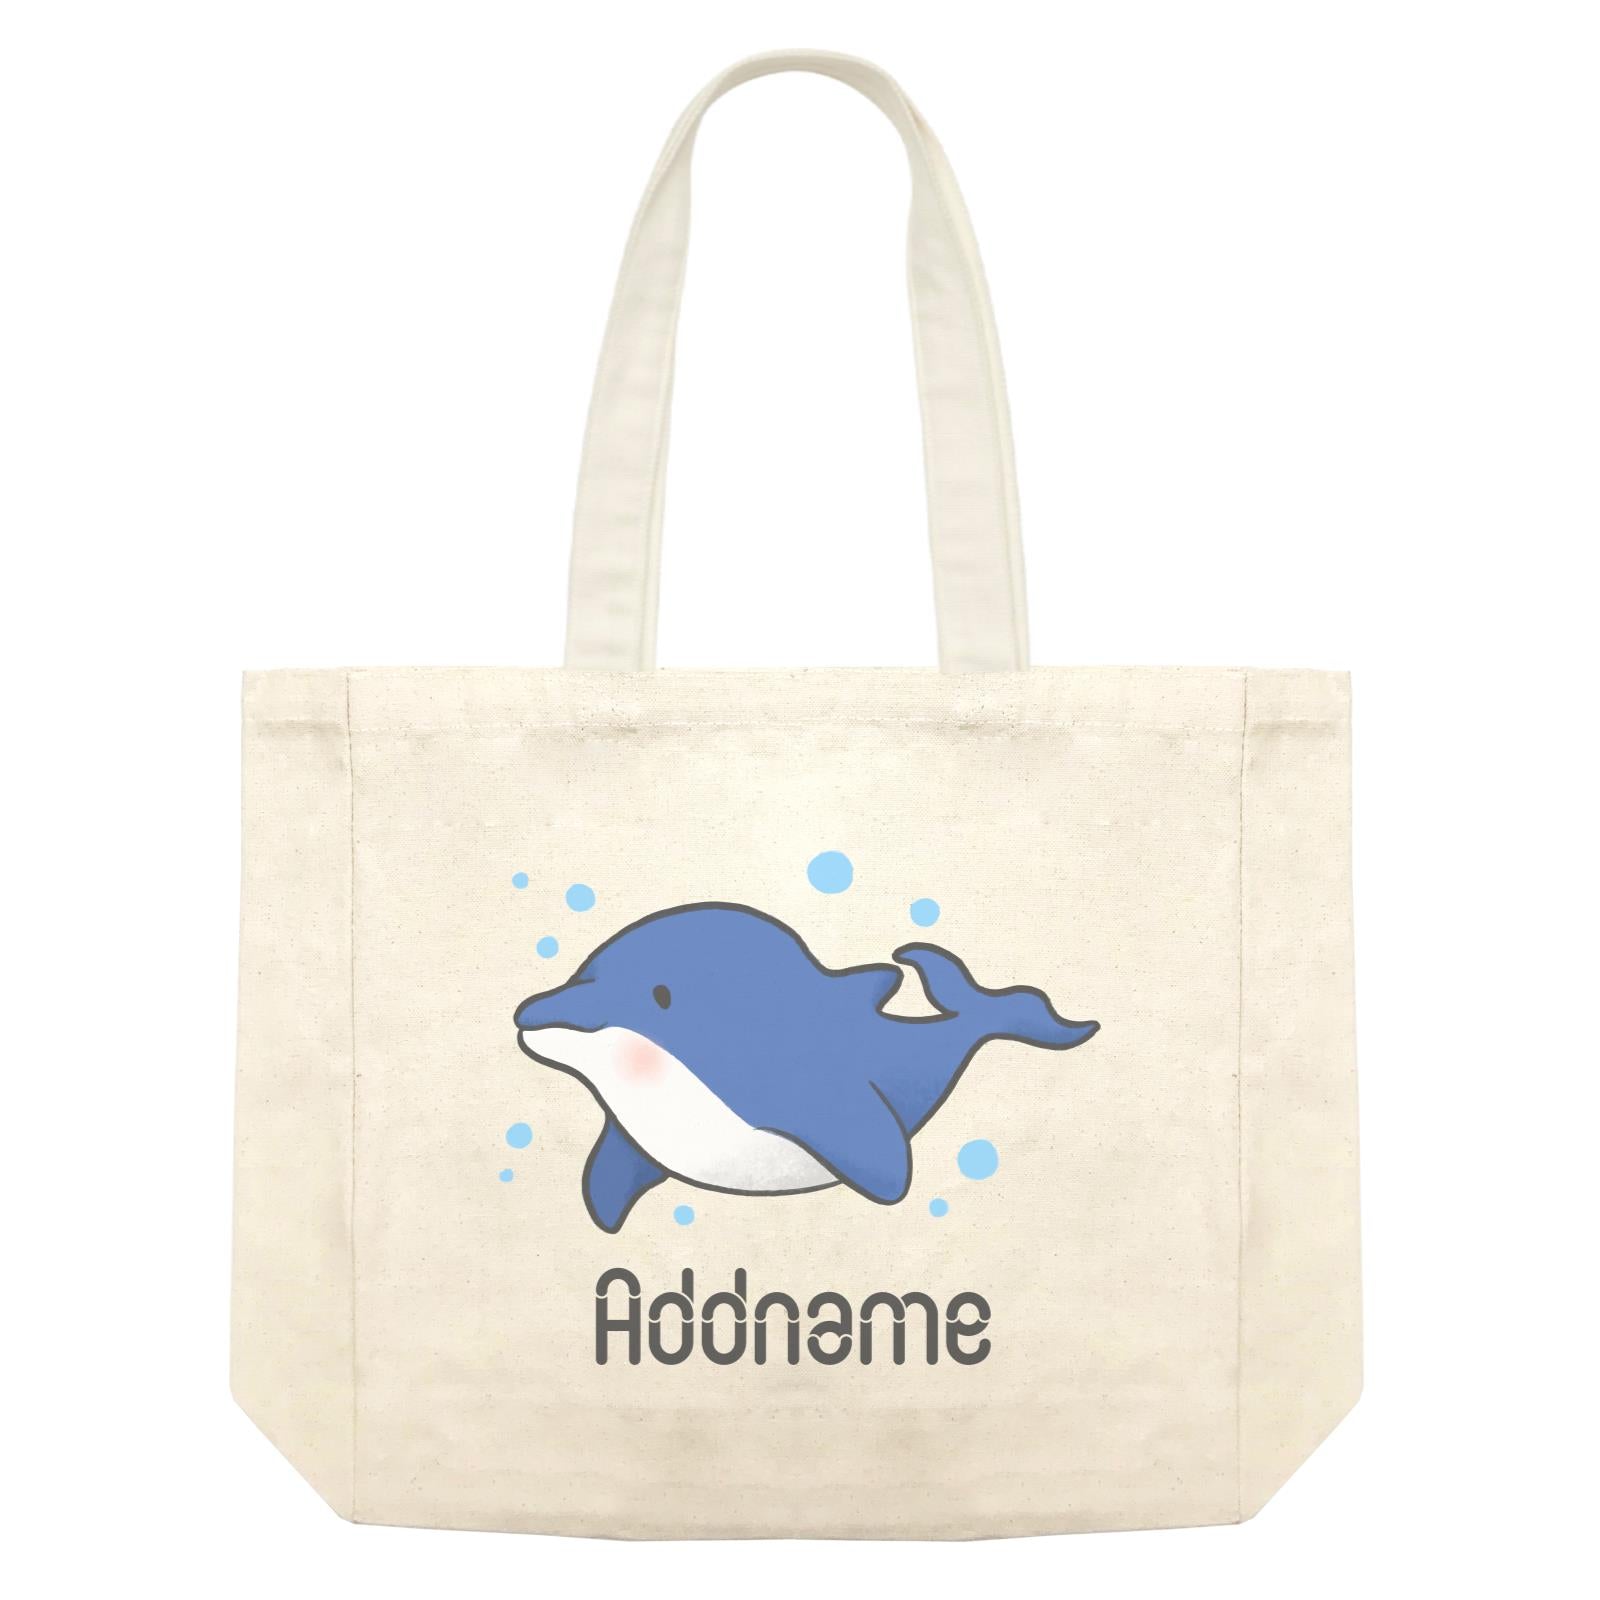 Cute Hand Drawn Style Dolphin Addname Shopping Bag